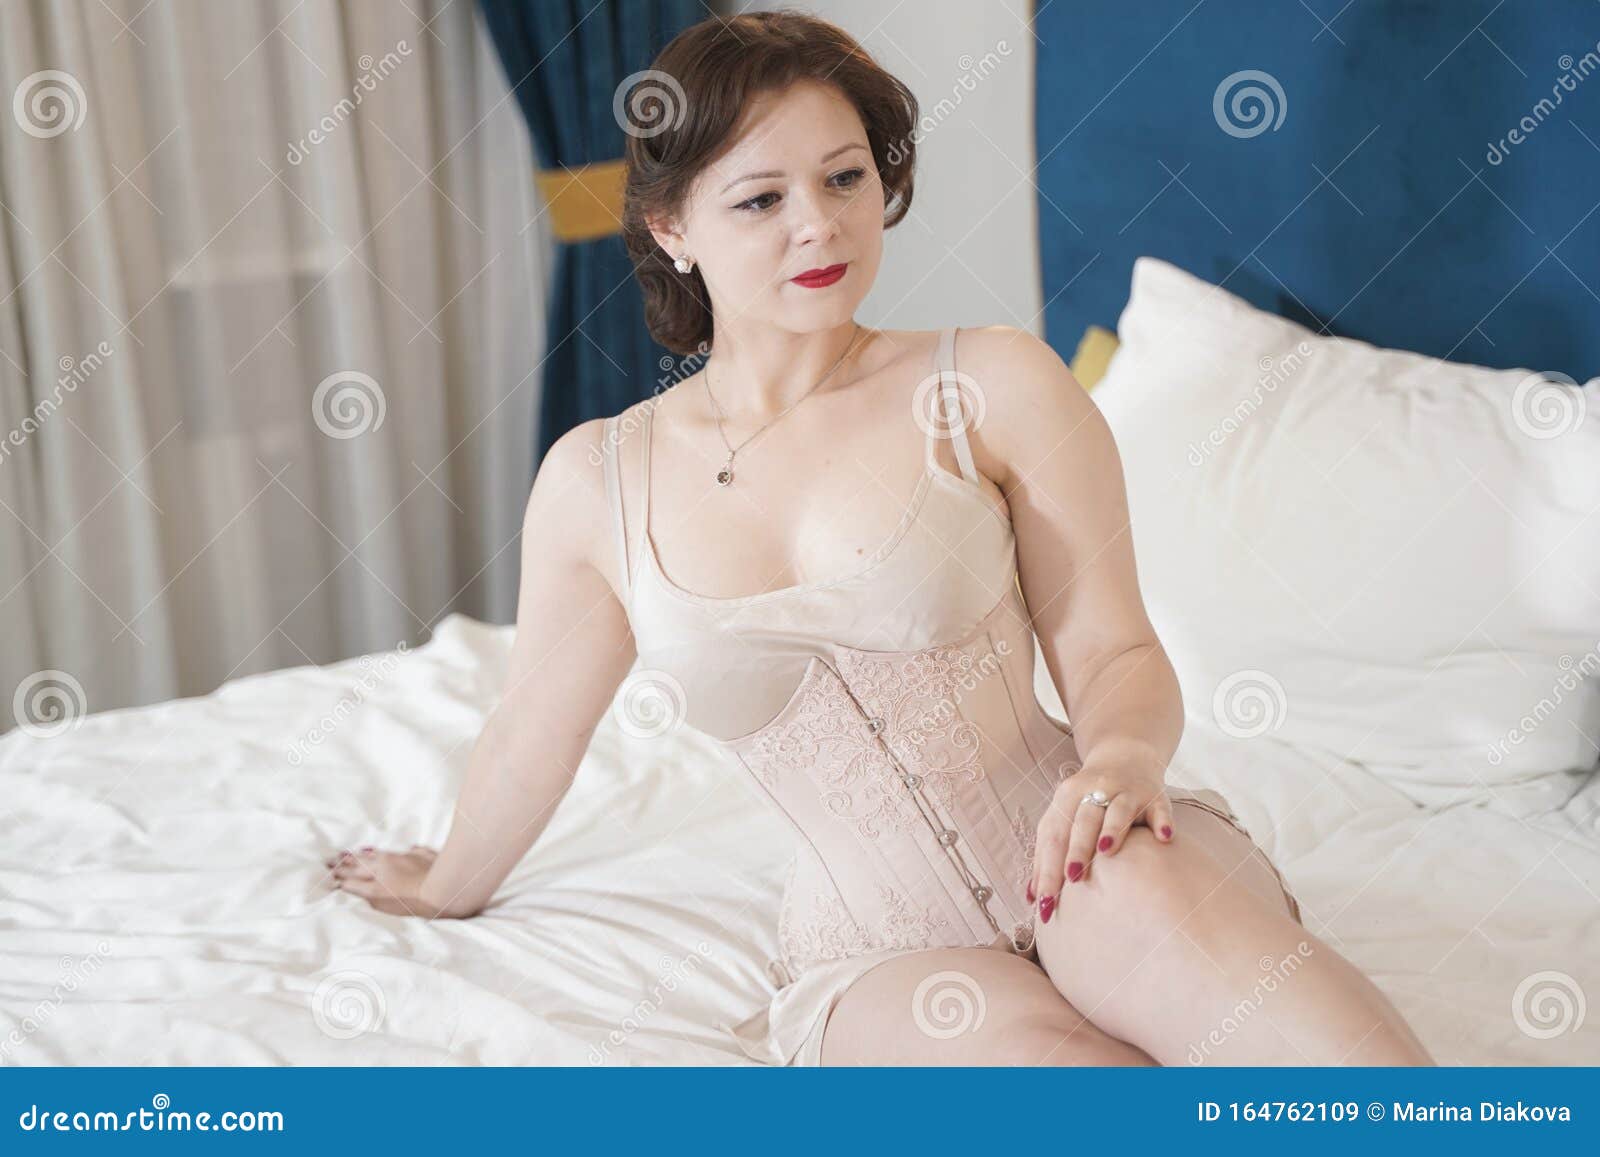 Retro Fifties Pin-up Attractive Girl in Vintage Lingerie on White Bed Background - Pin-up Concept Stock Image photo